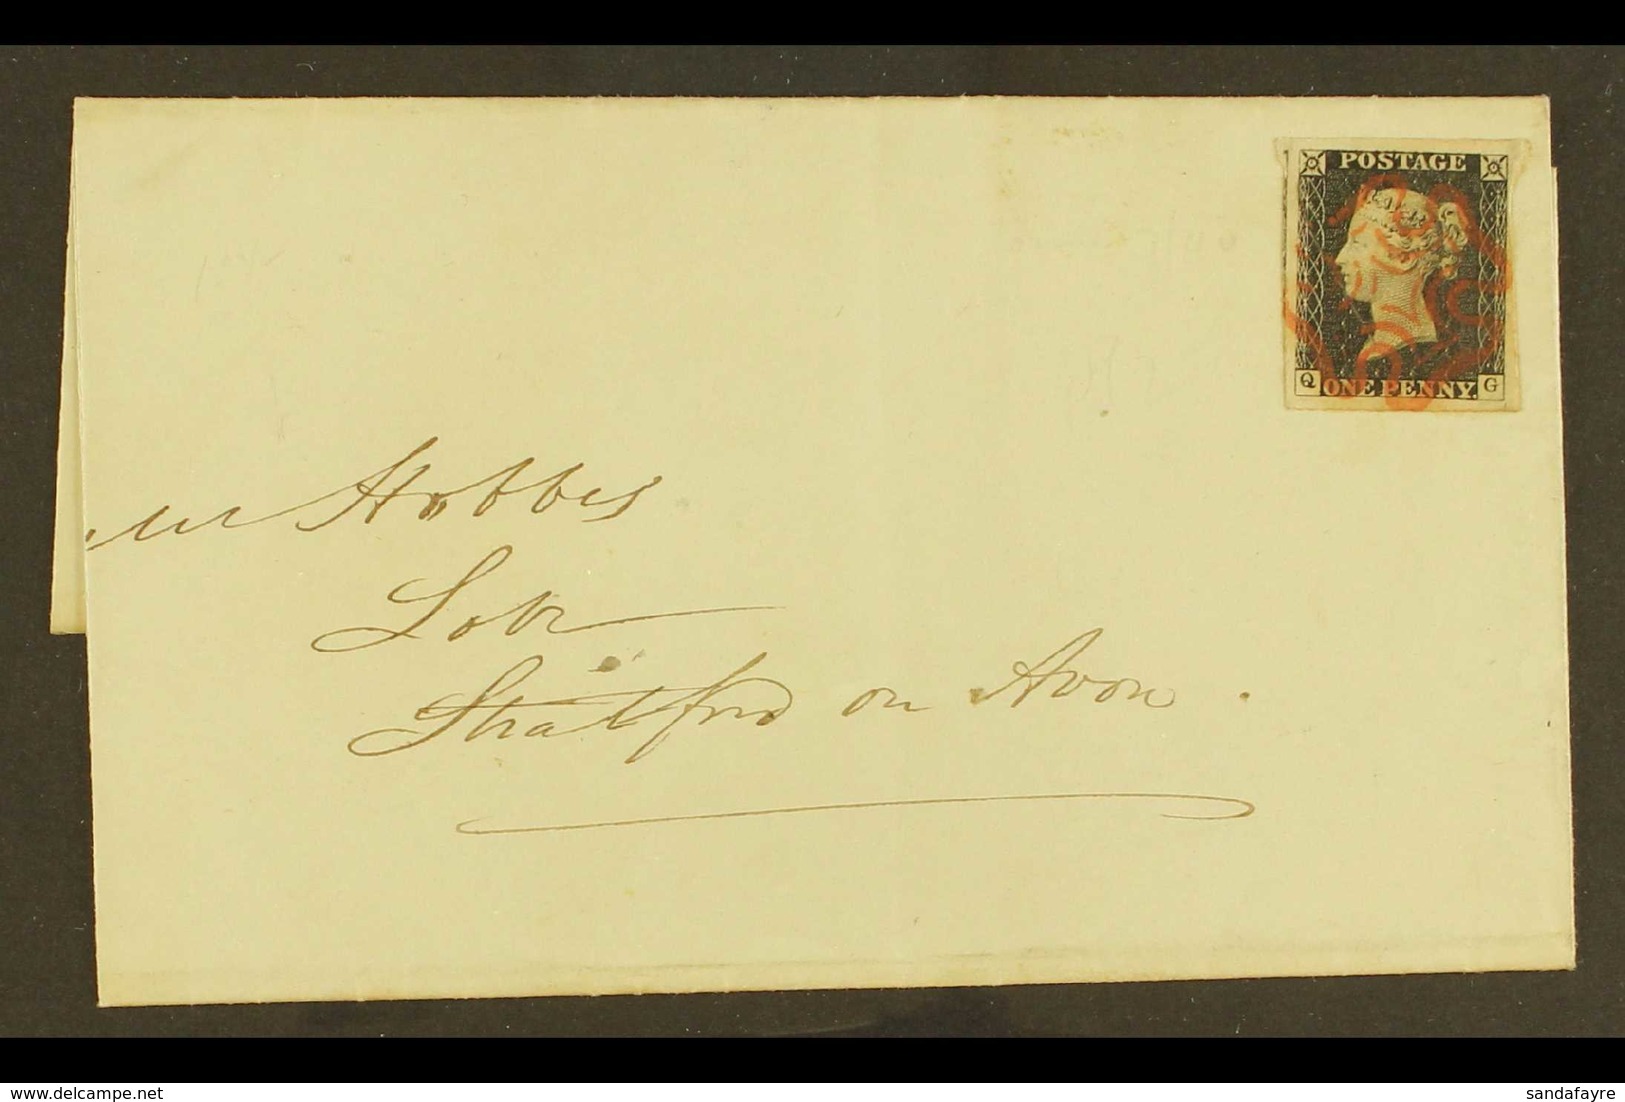 1840 1d Black 'QG' Plate 2, SG 2, Magnificent Used Example With Internal Wrinkle On Cover, Cancelled By Crisp Red Maltes - Ohne Zuordnung